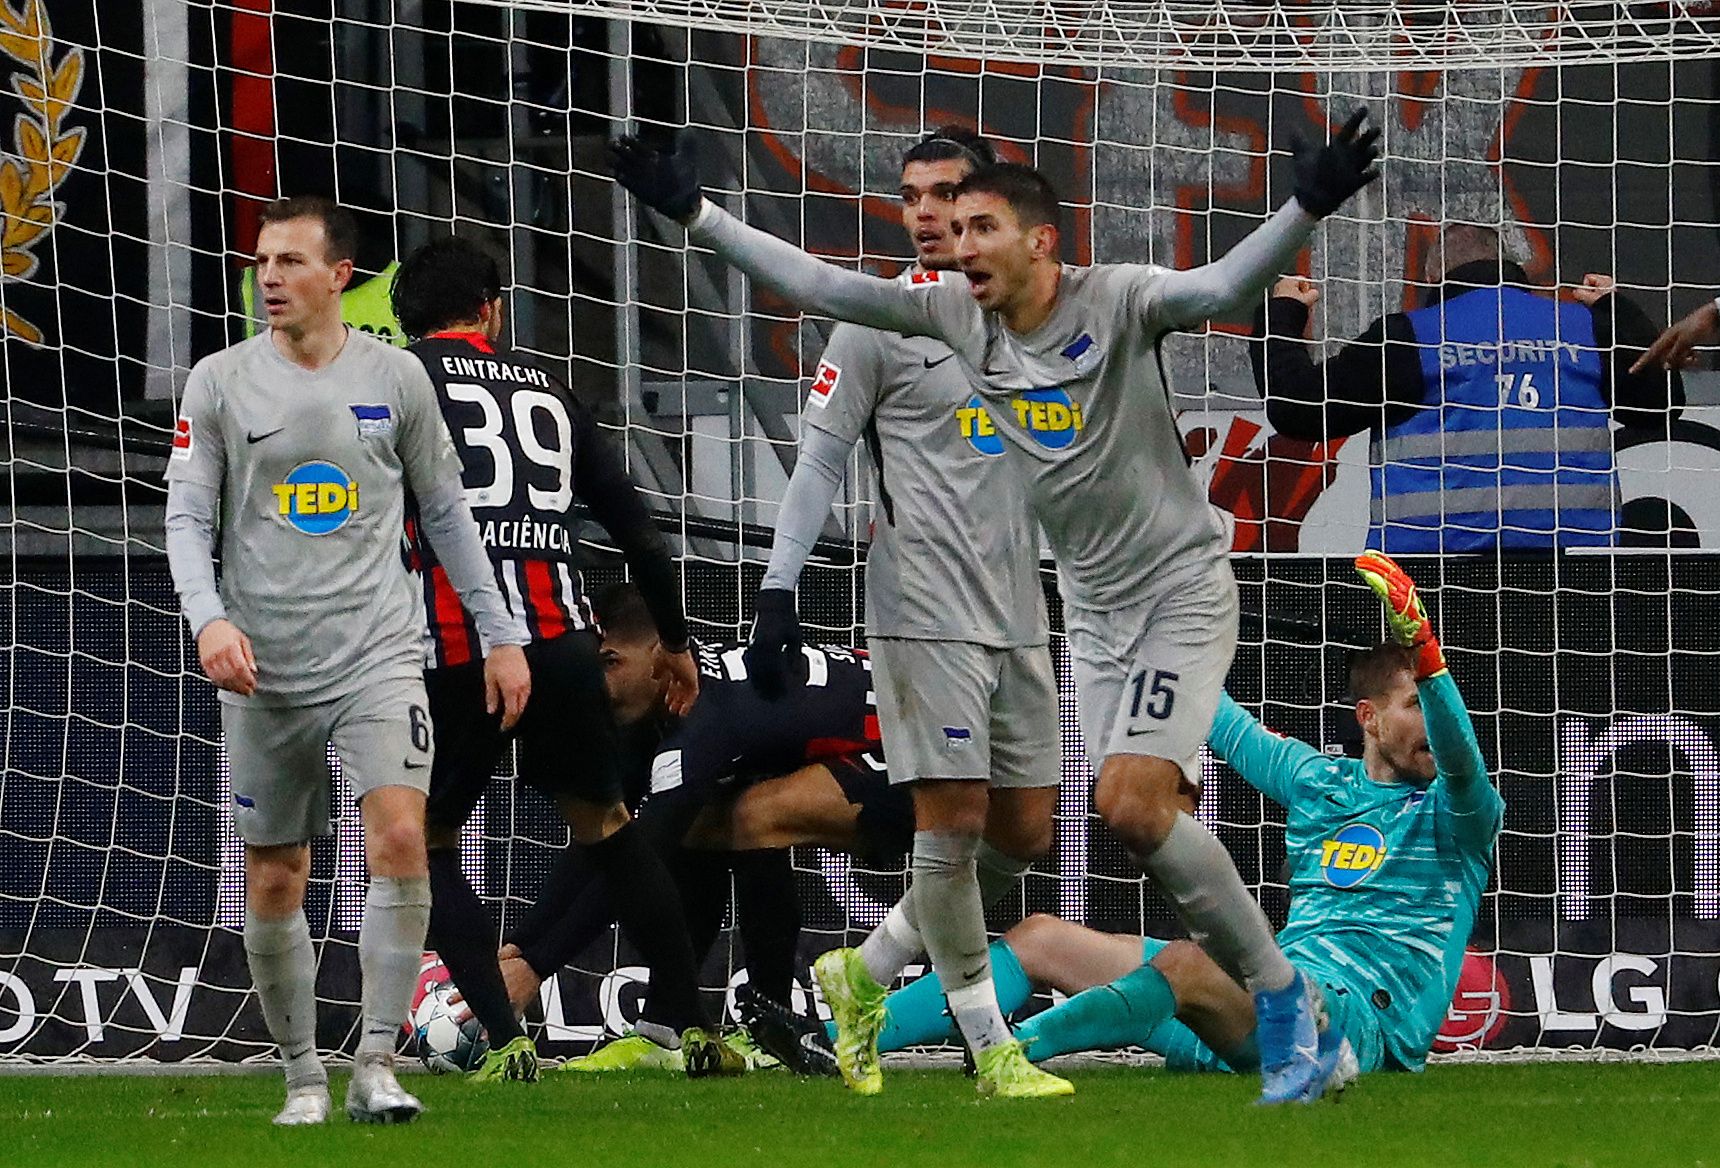 Soccer Football - Bundesliga - Eintracht Frankfurt v Hertha BSC - Commerzbank-Arena, Frankfurt, Germany - December 6, 2019   Hertha BSC's Marko Grujic and teammates react after Hertha BSC's Thomas Kraft is fouled   REUTERS/Kai Pfaffenbach    DFL regulations prohibit any use of photographs as image sequences and/or quasi-video